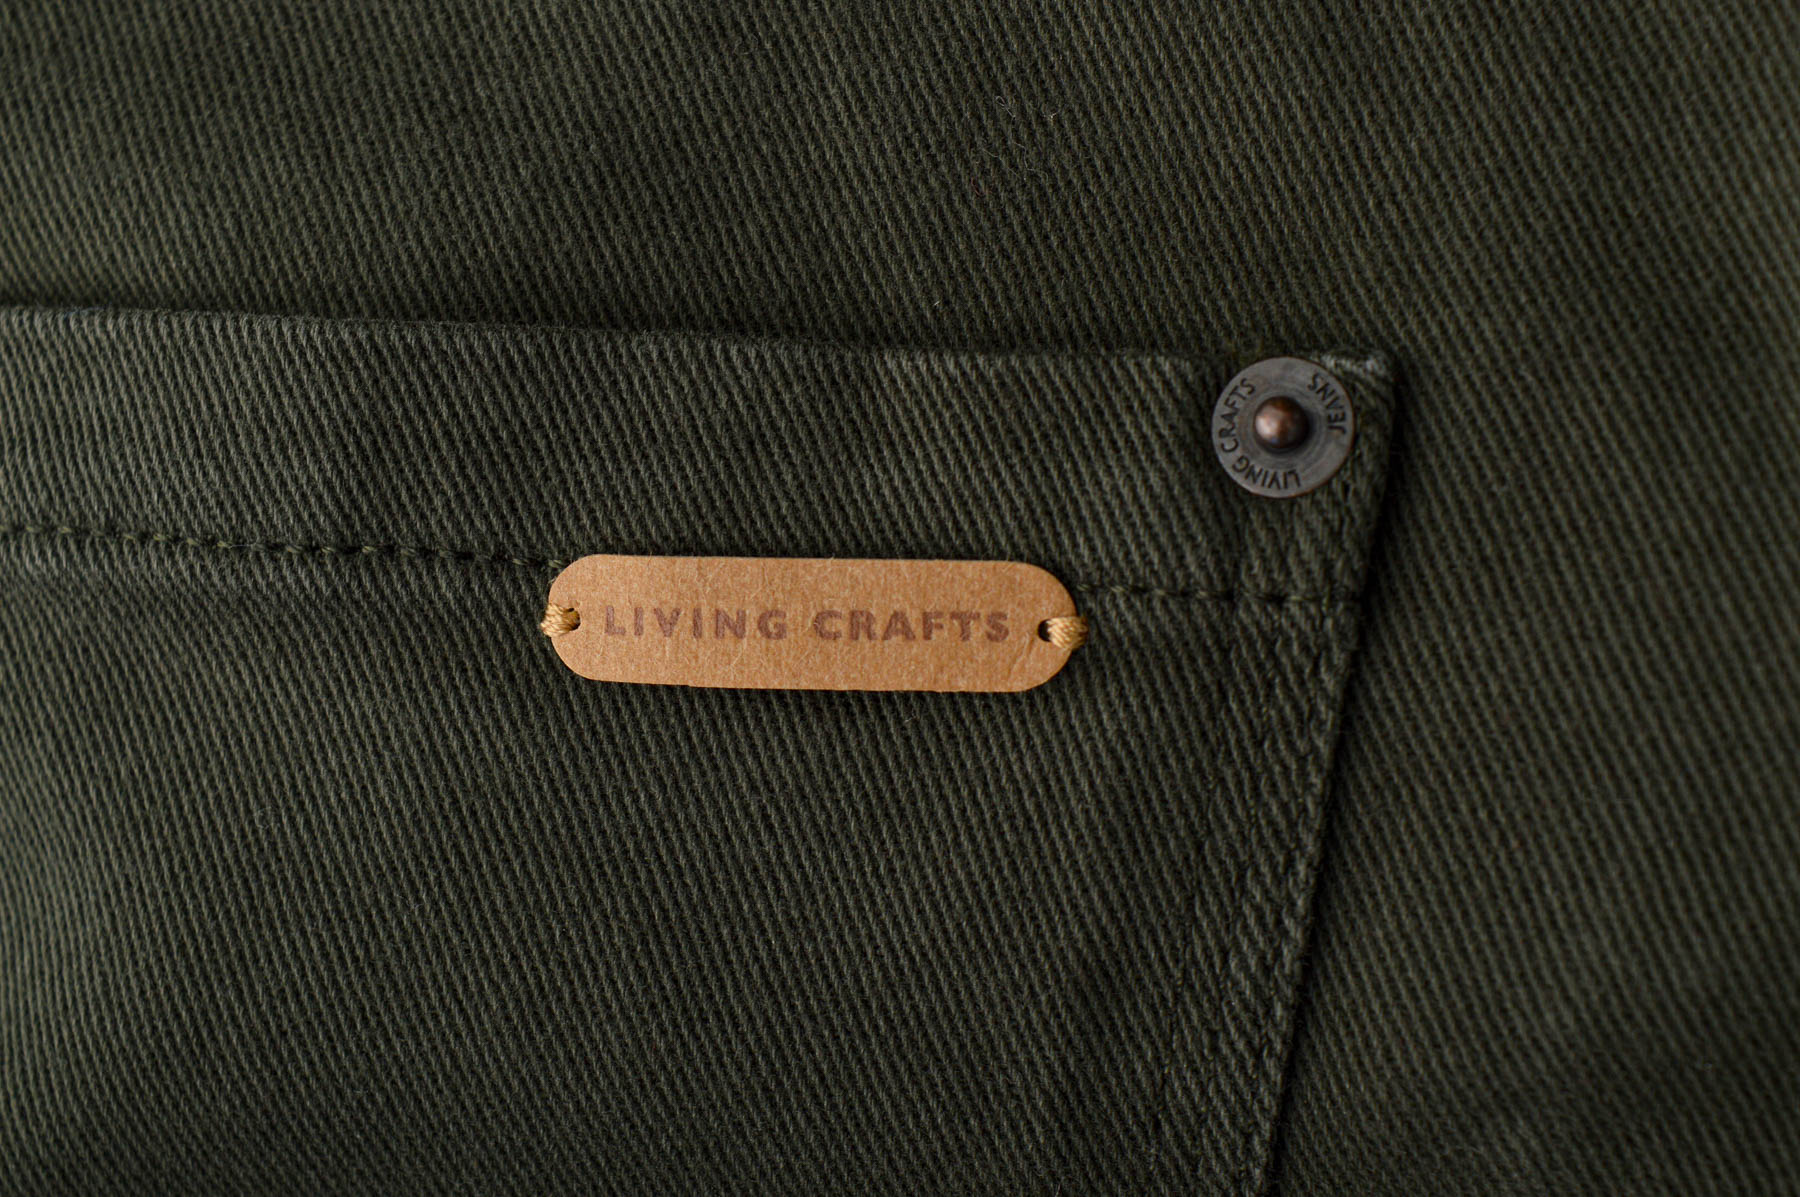 Men's trousers - Living Crafts - 2